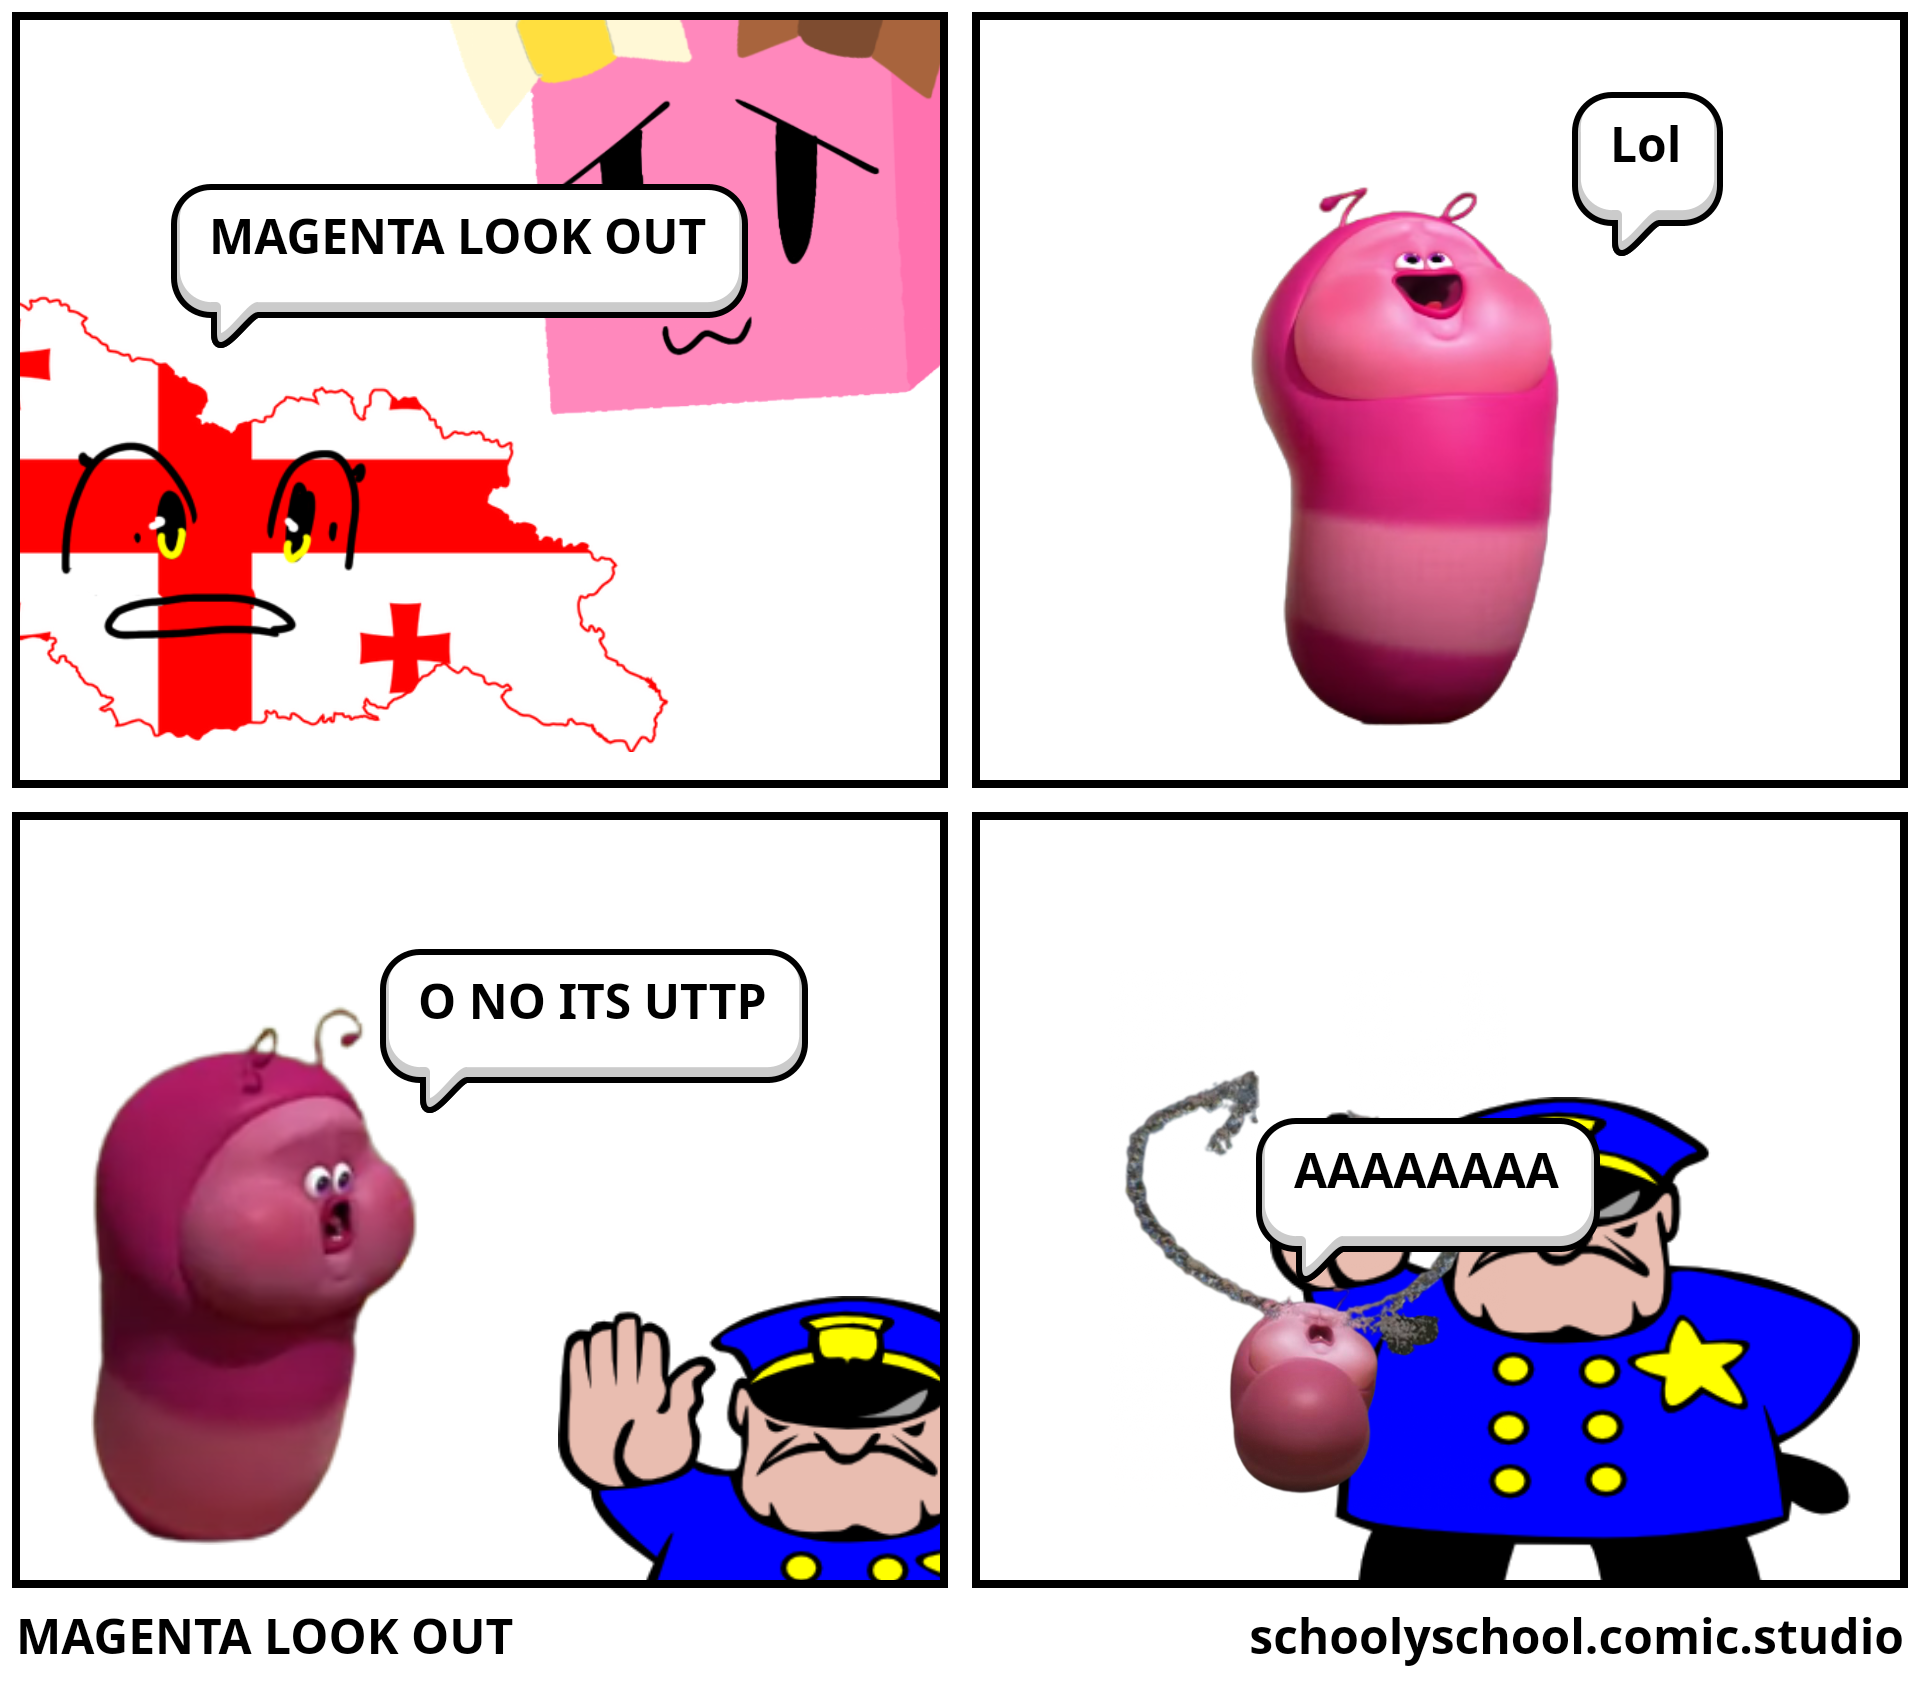 MAGENTA LOOK OUT